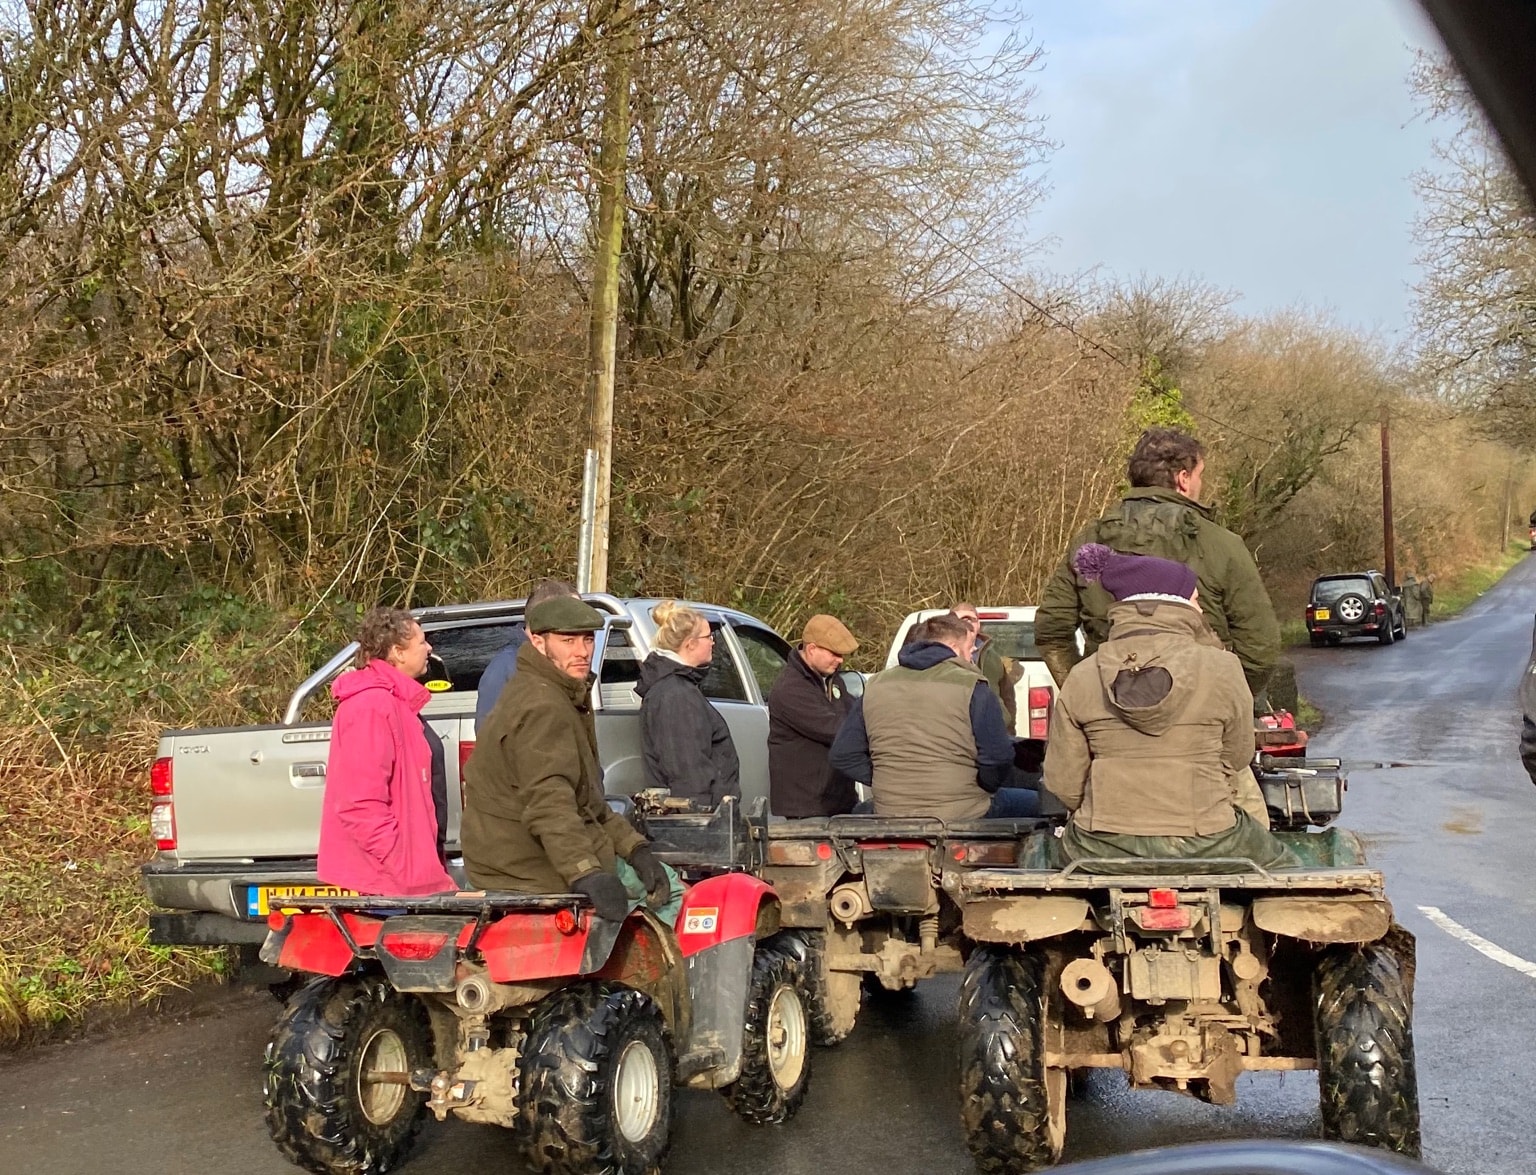 Torrington Farmers Hunt support with no plates on their quads.